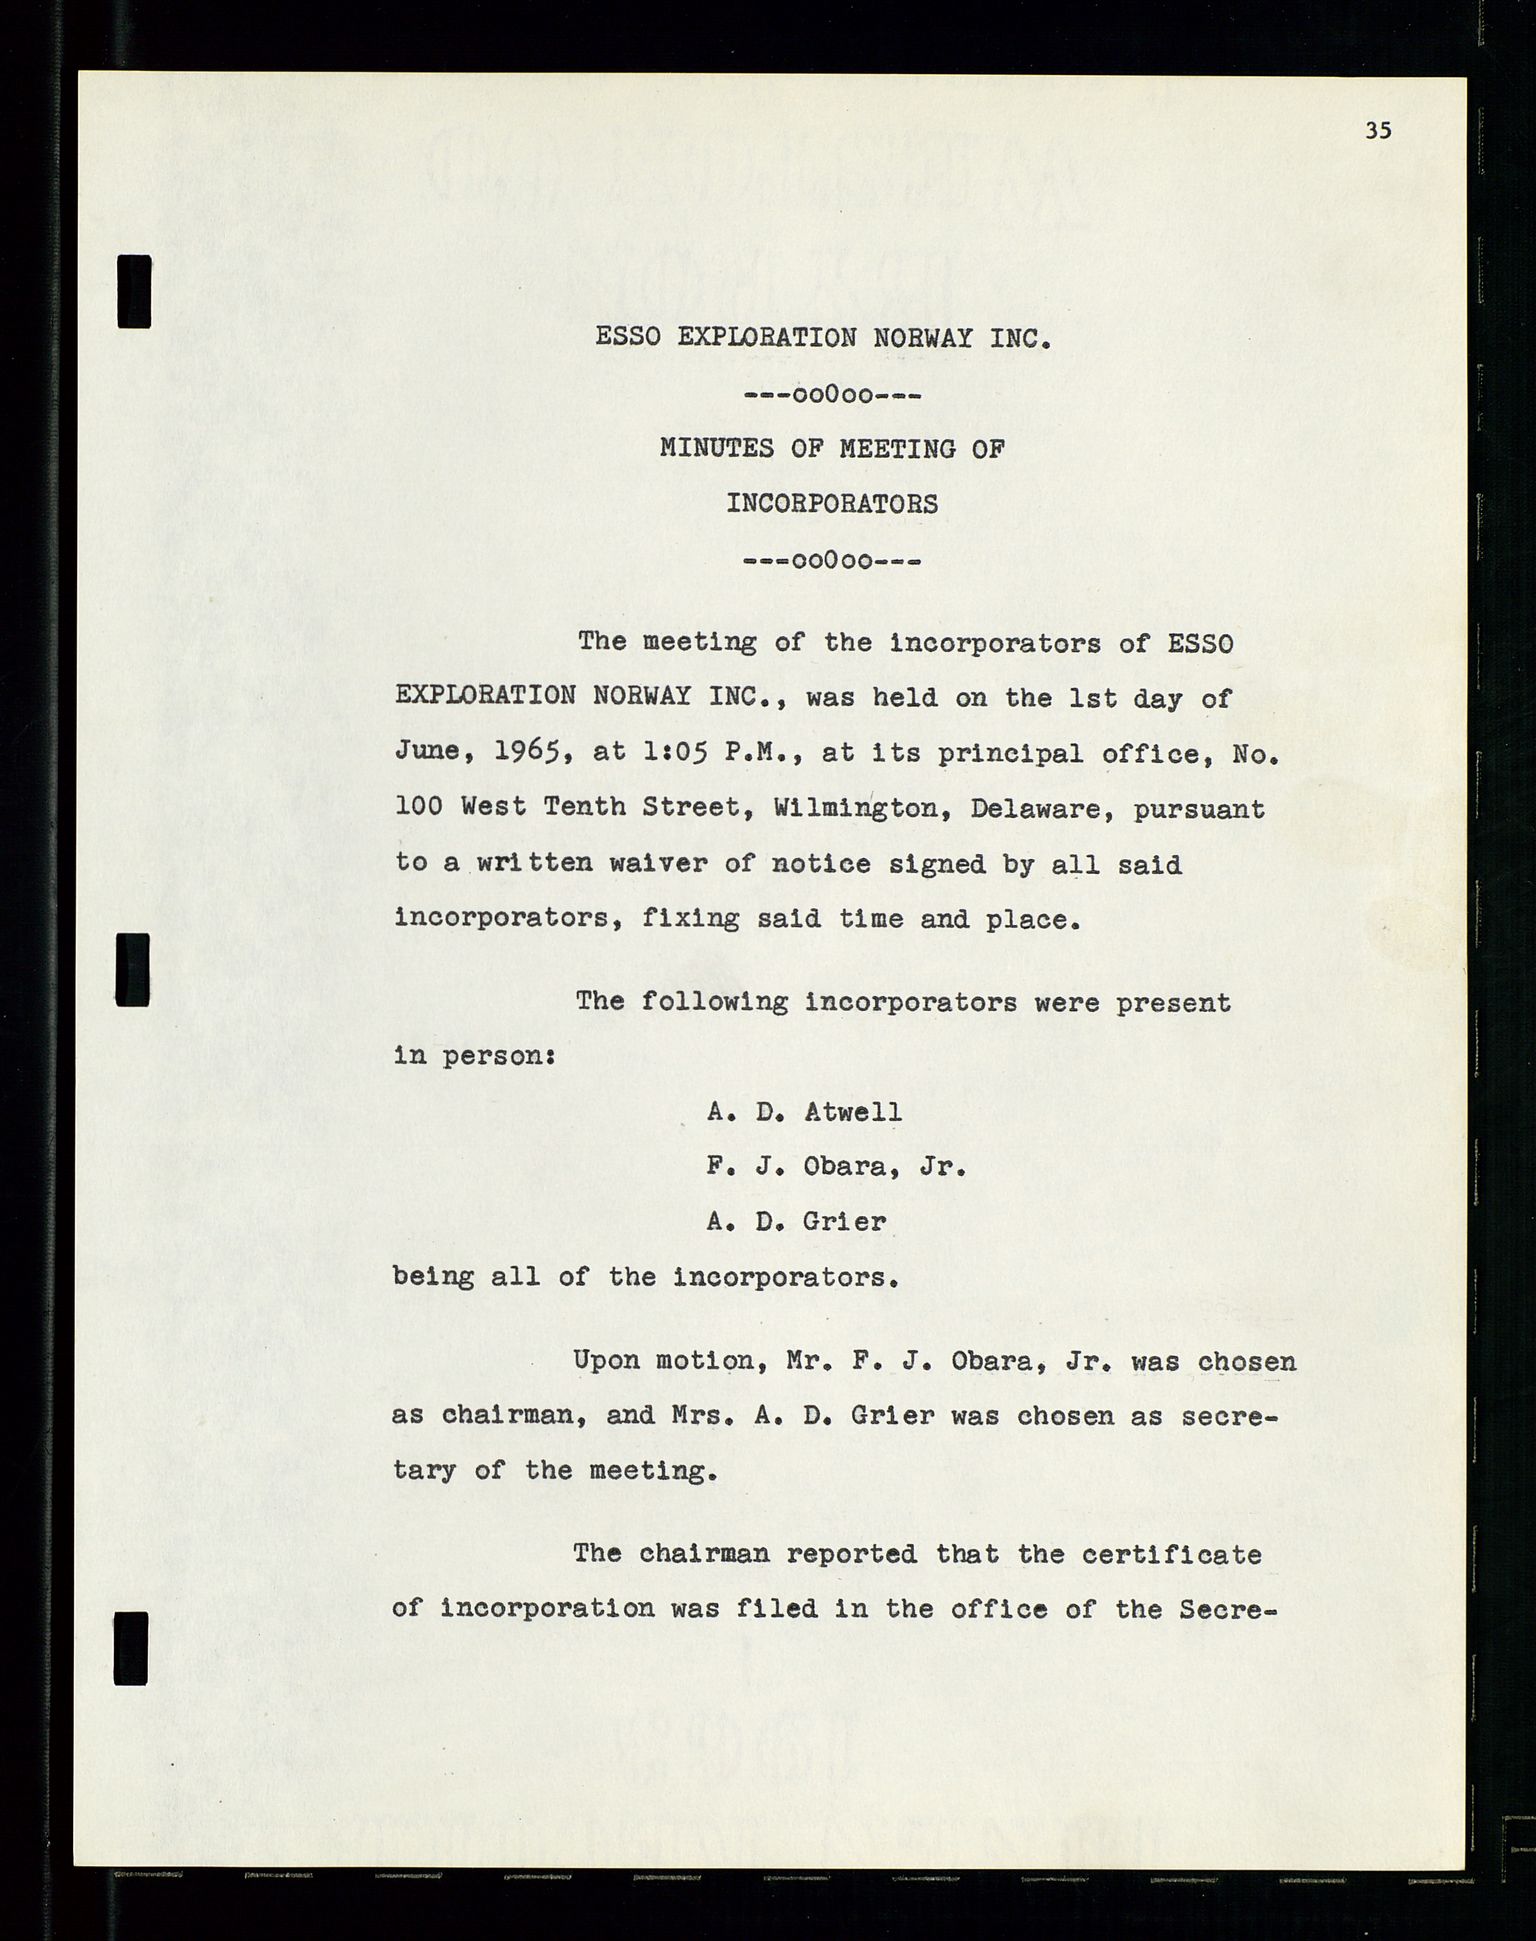 Pa 1512 - Esso Exploration and Production Norway Inc., SAST/A-101917/A/Aa/L0001/0001: Styredokumenter / Corporate records, By-Laws, Board meeting minutes, Incorporations, 1965-1975, p. 35